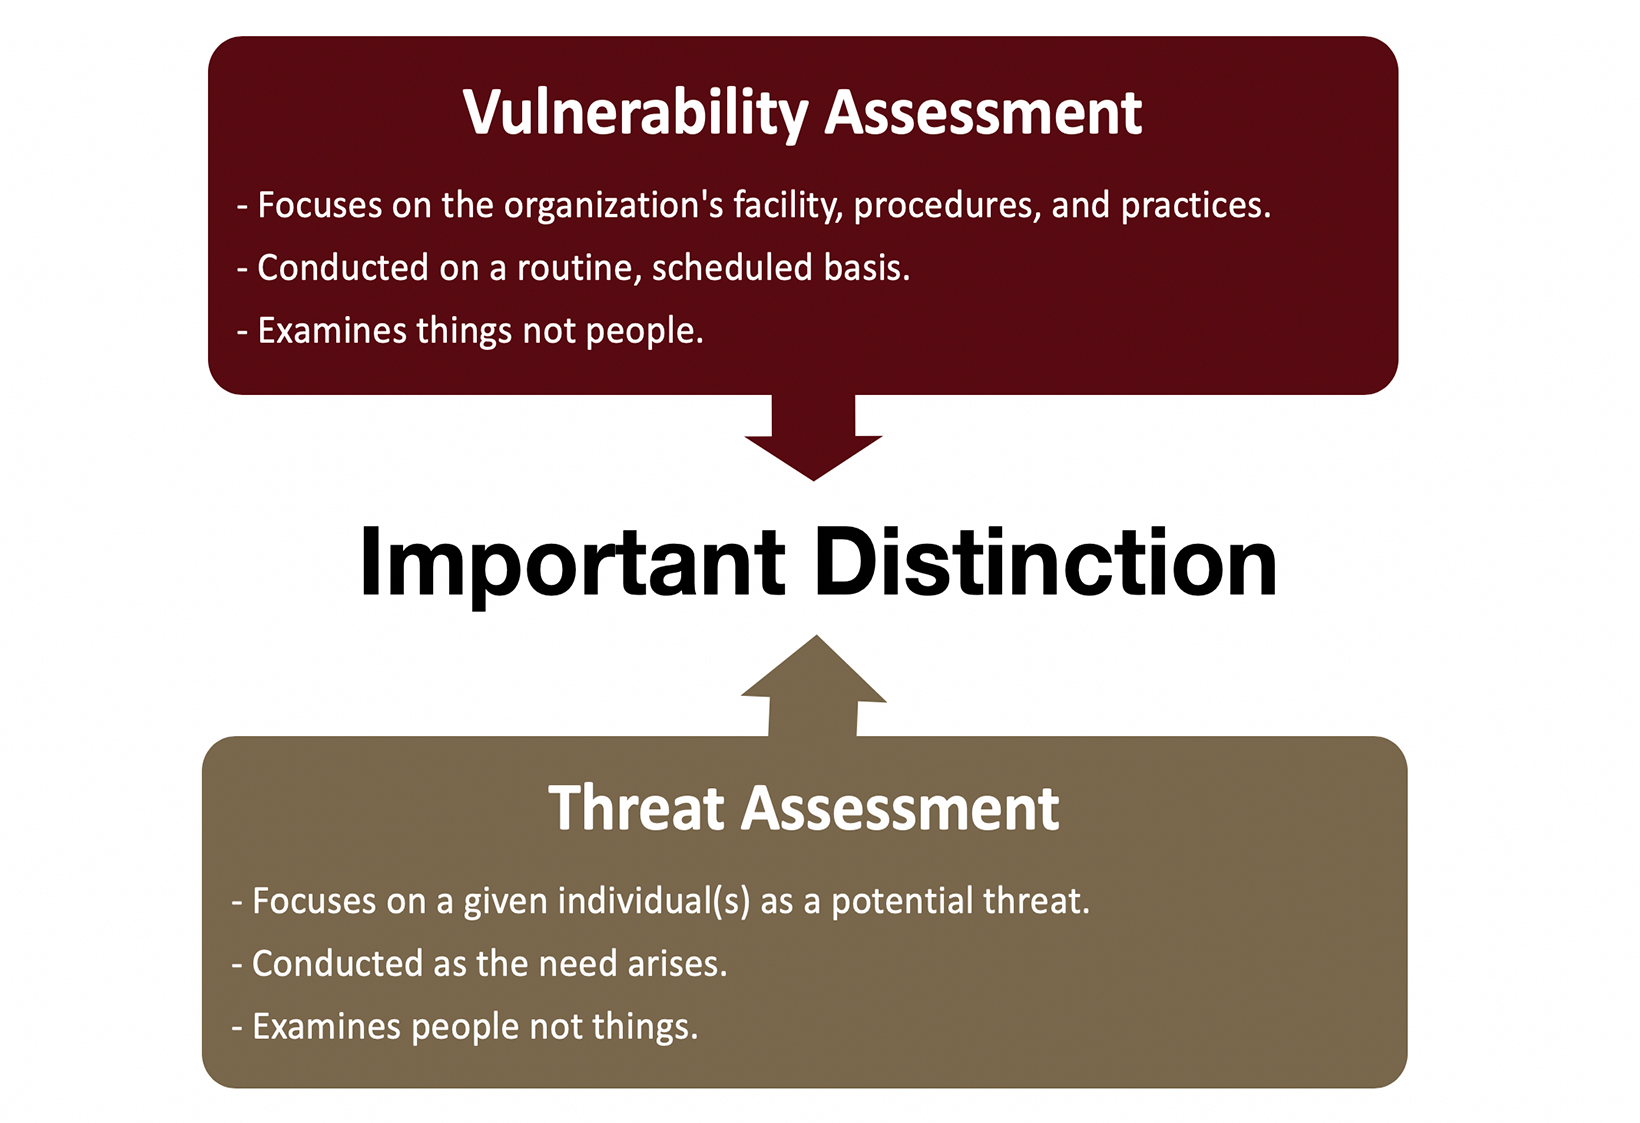 image illustrating the importance of vulnerability assessment and threat assessment